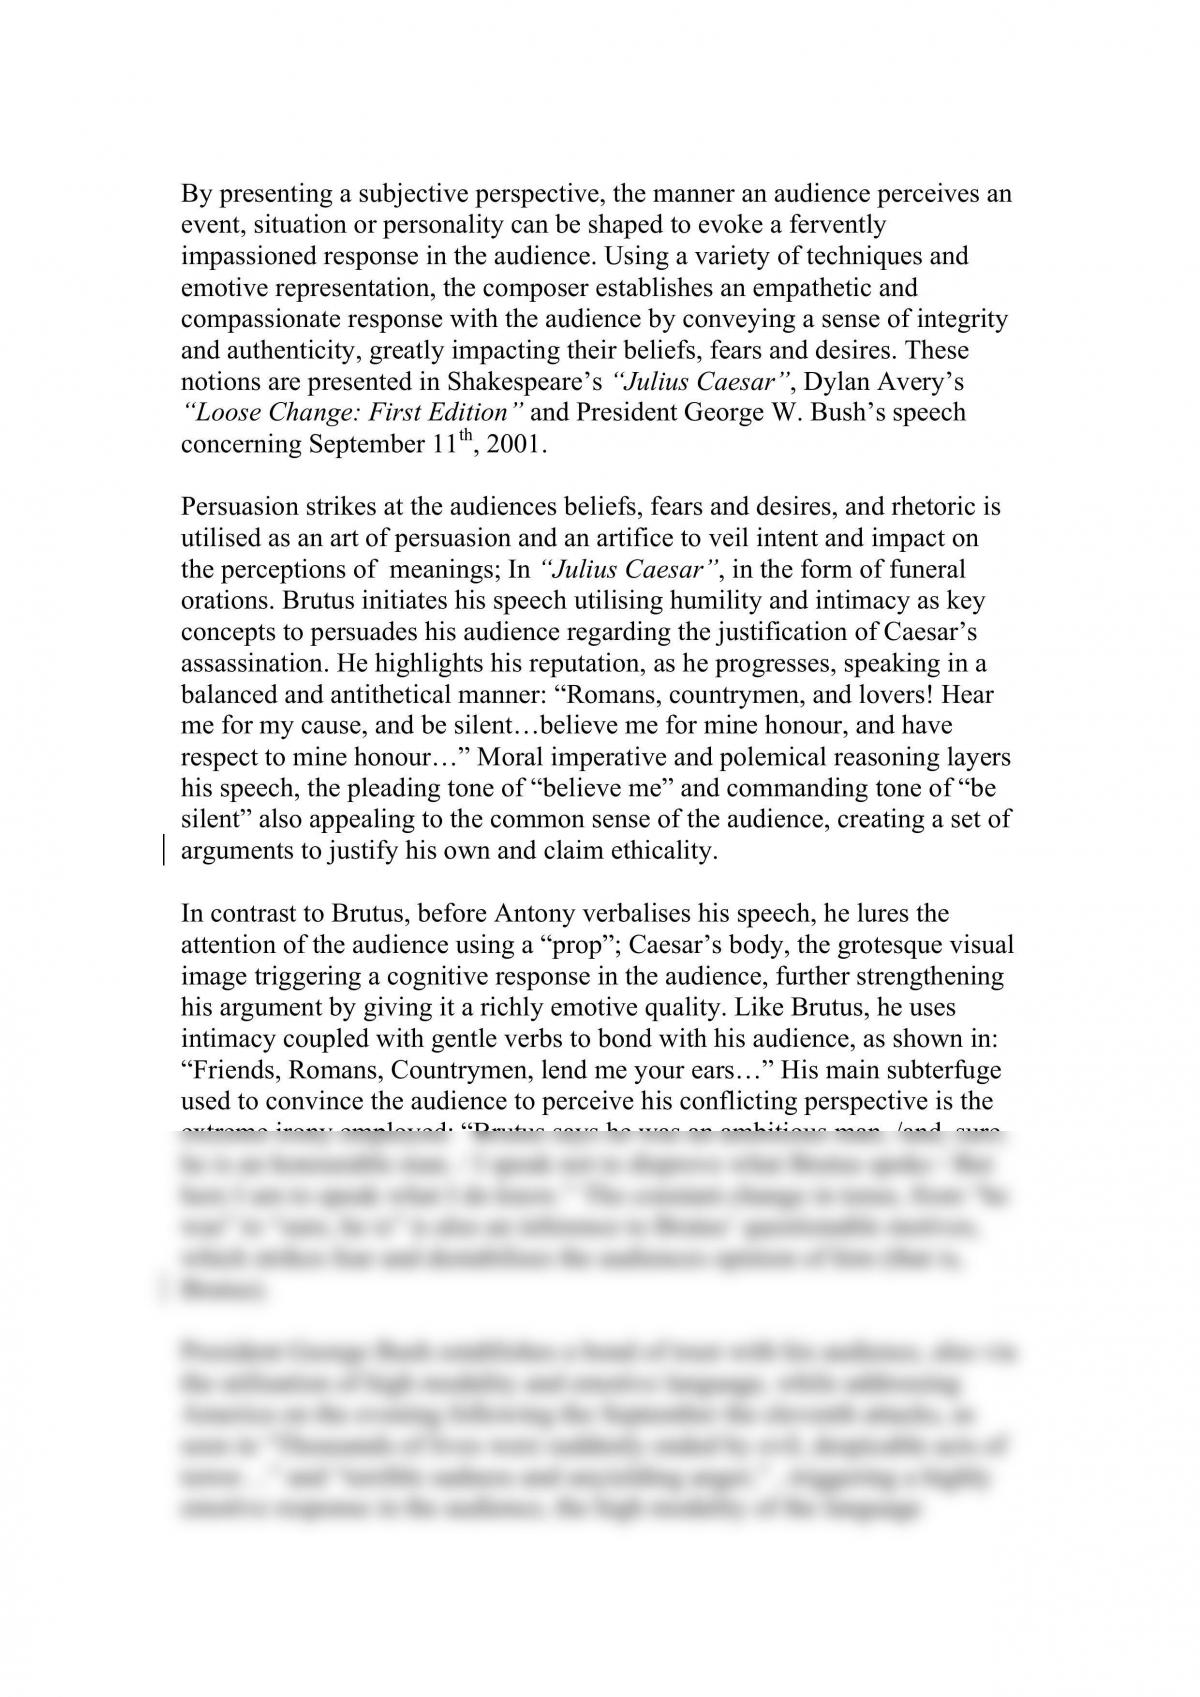 Module C: Conflicting Perspectives essay - Page 1